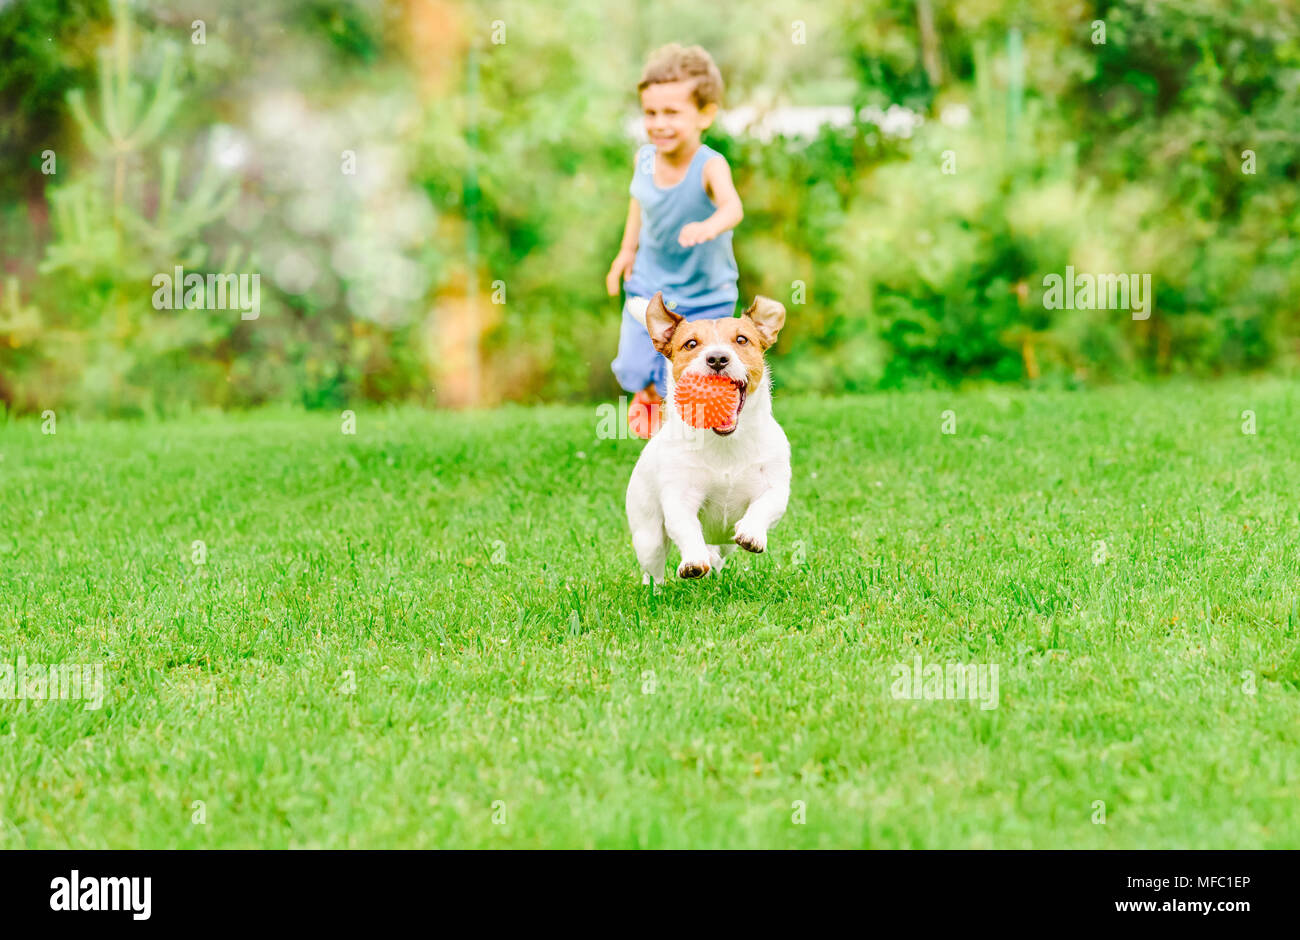 Dog with ball in mouth runs from kid playing chase game at summer lawn Stock Photo